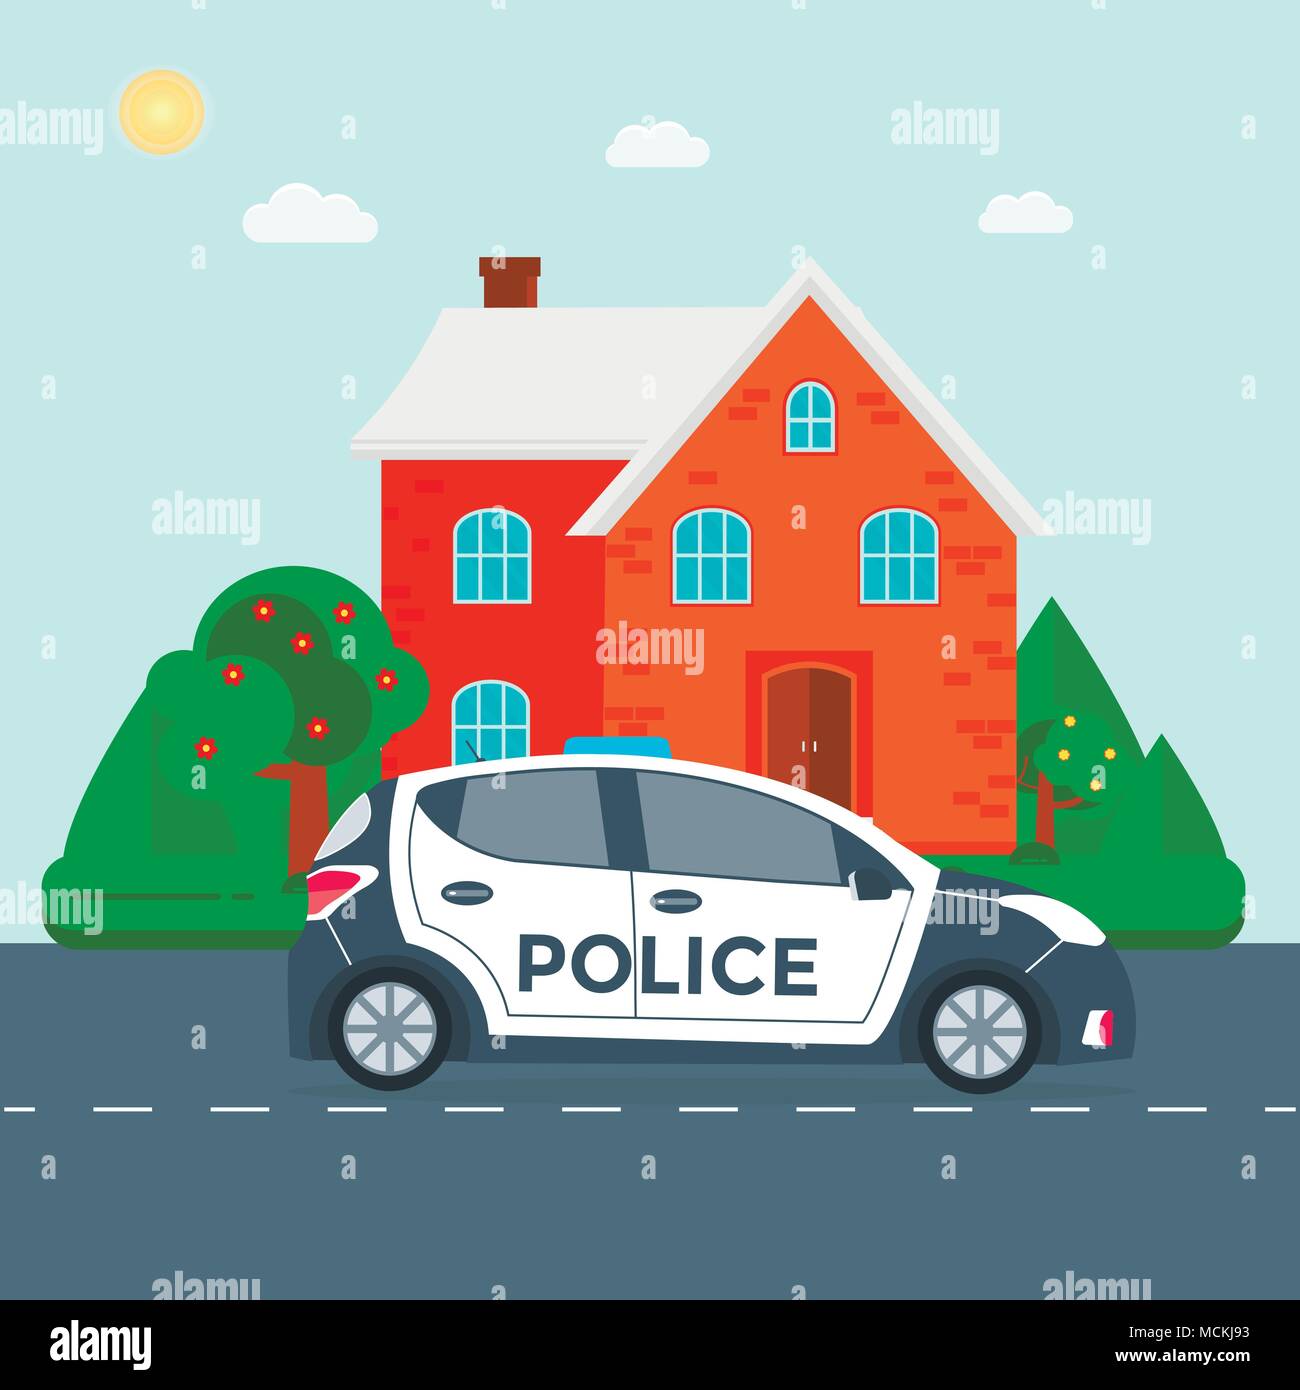 Police patrol on a road with police car, house, nature landscape, vehicle with rooftop flashing lights. Flat vector illustration. Stock Vector